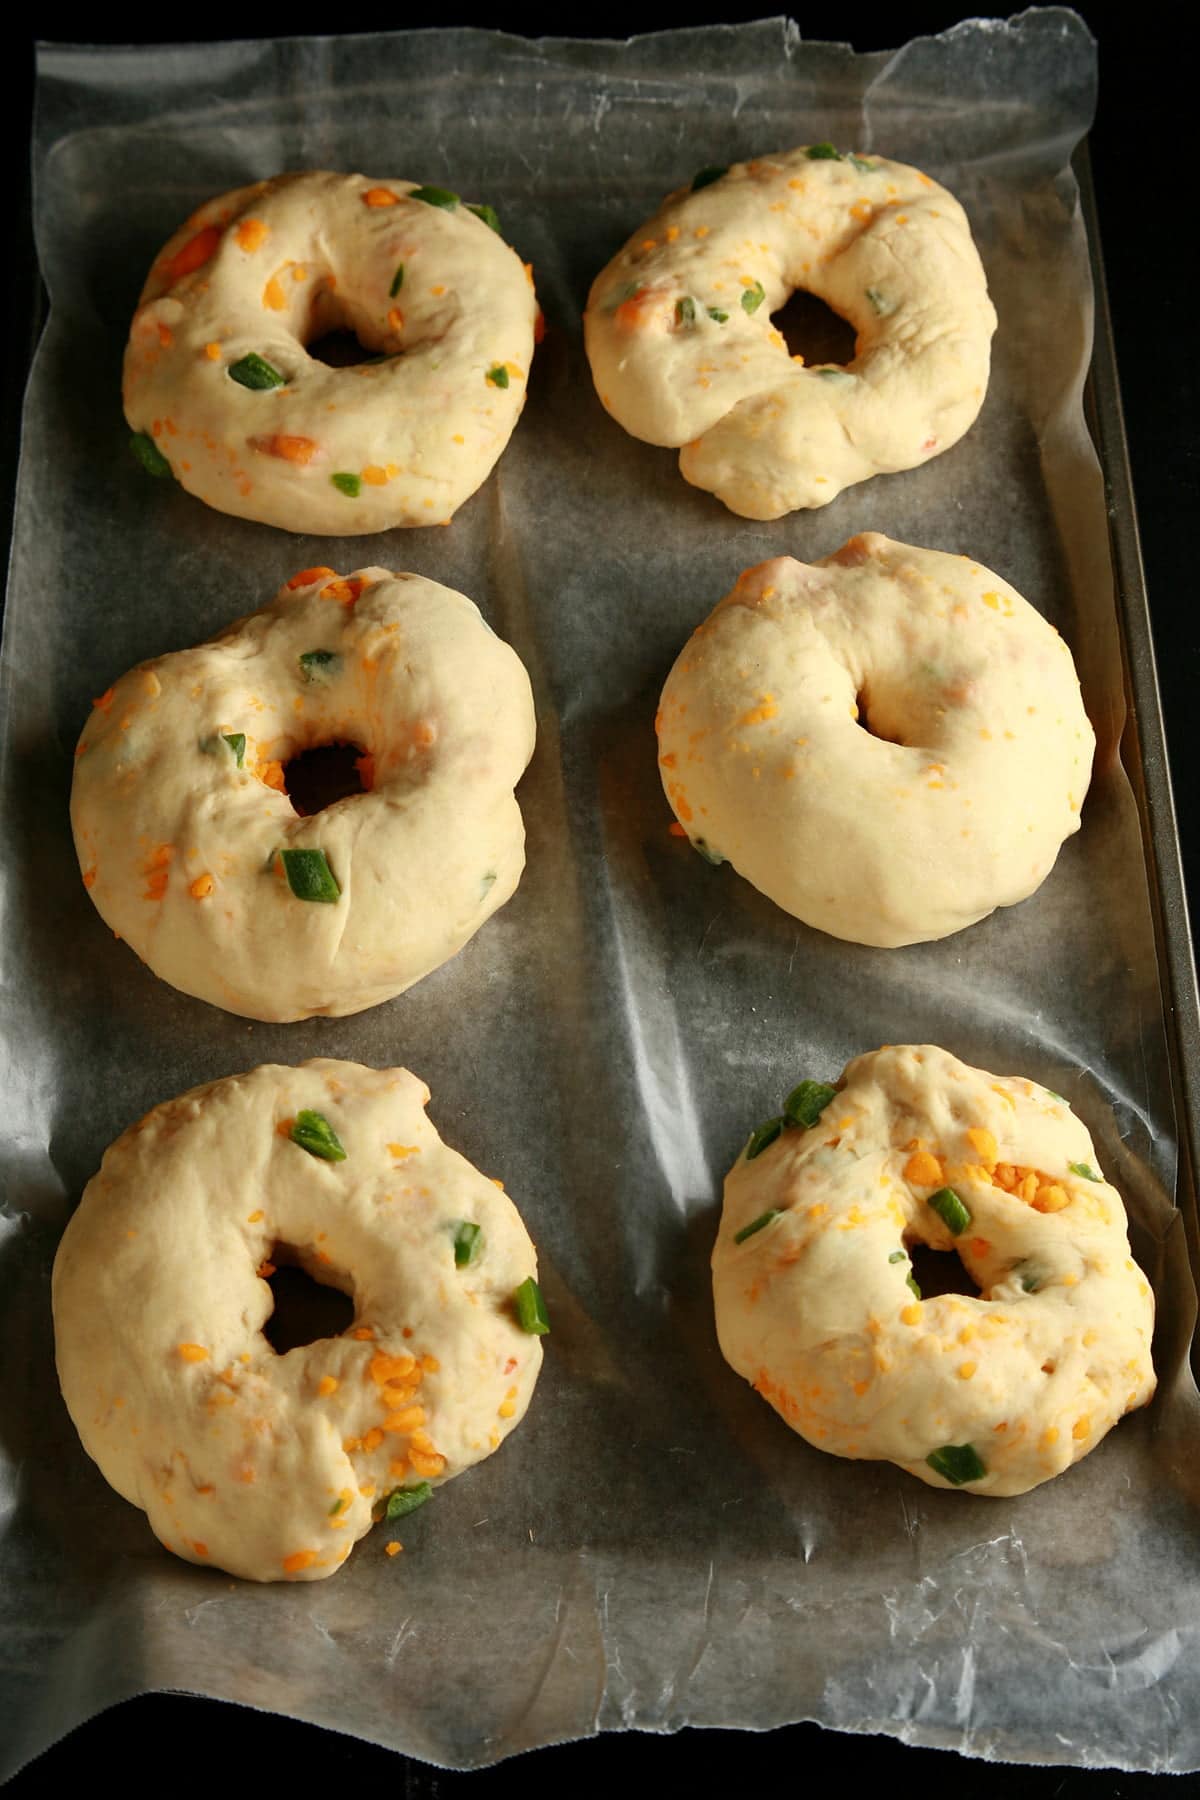 6 raw bagels are shown on a parchment lined surface. They are generously studded with jalapeno pepper pieces and cheese.